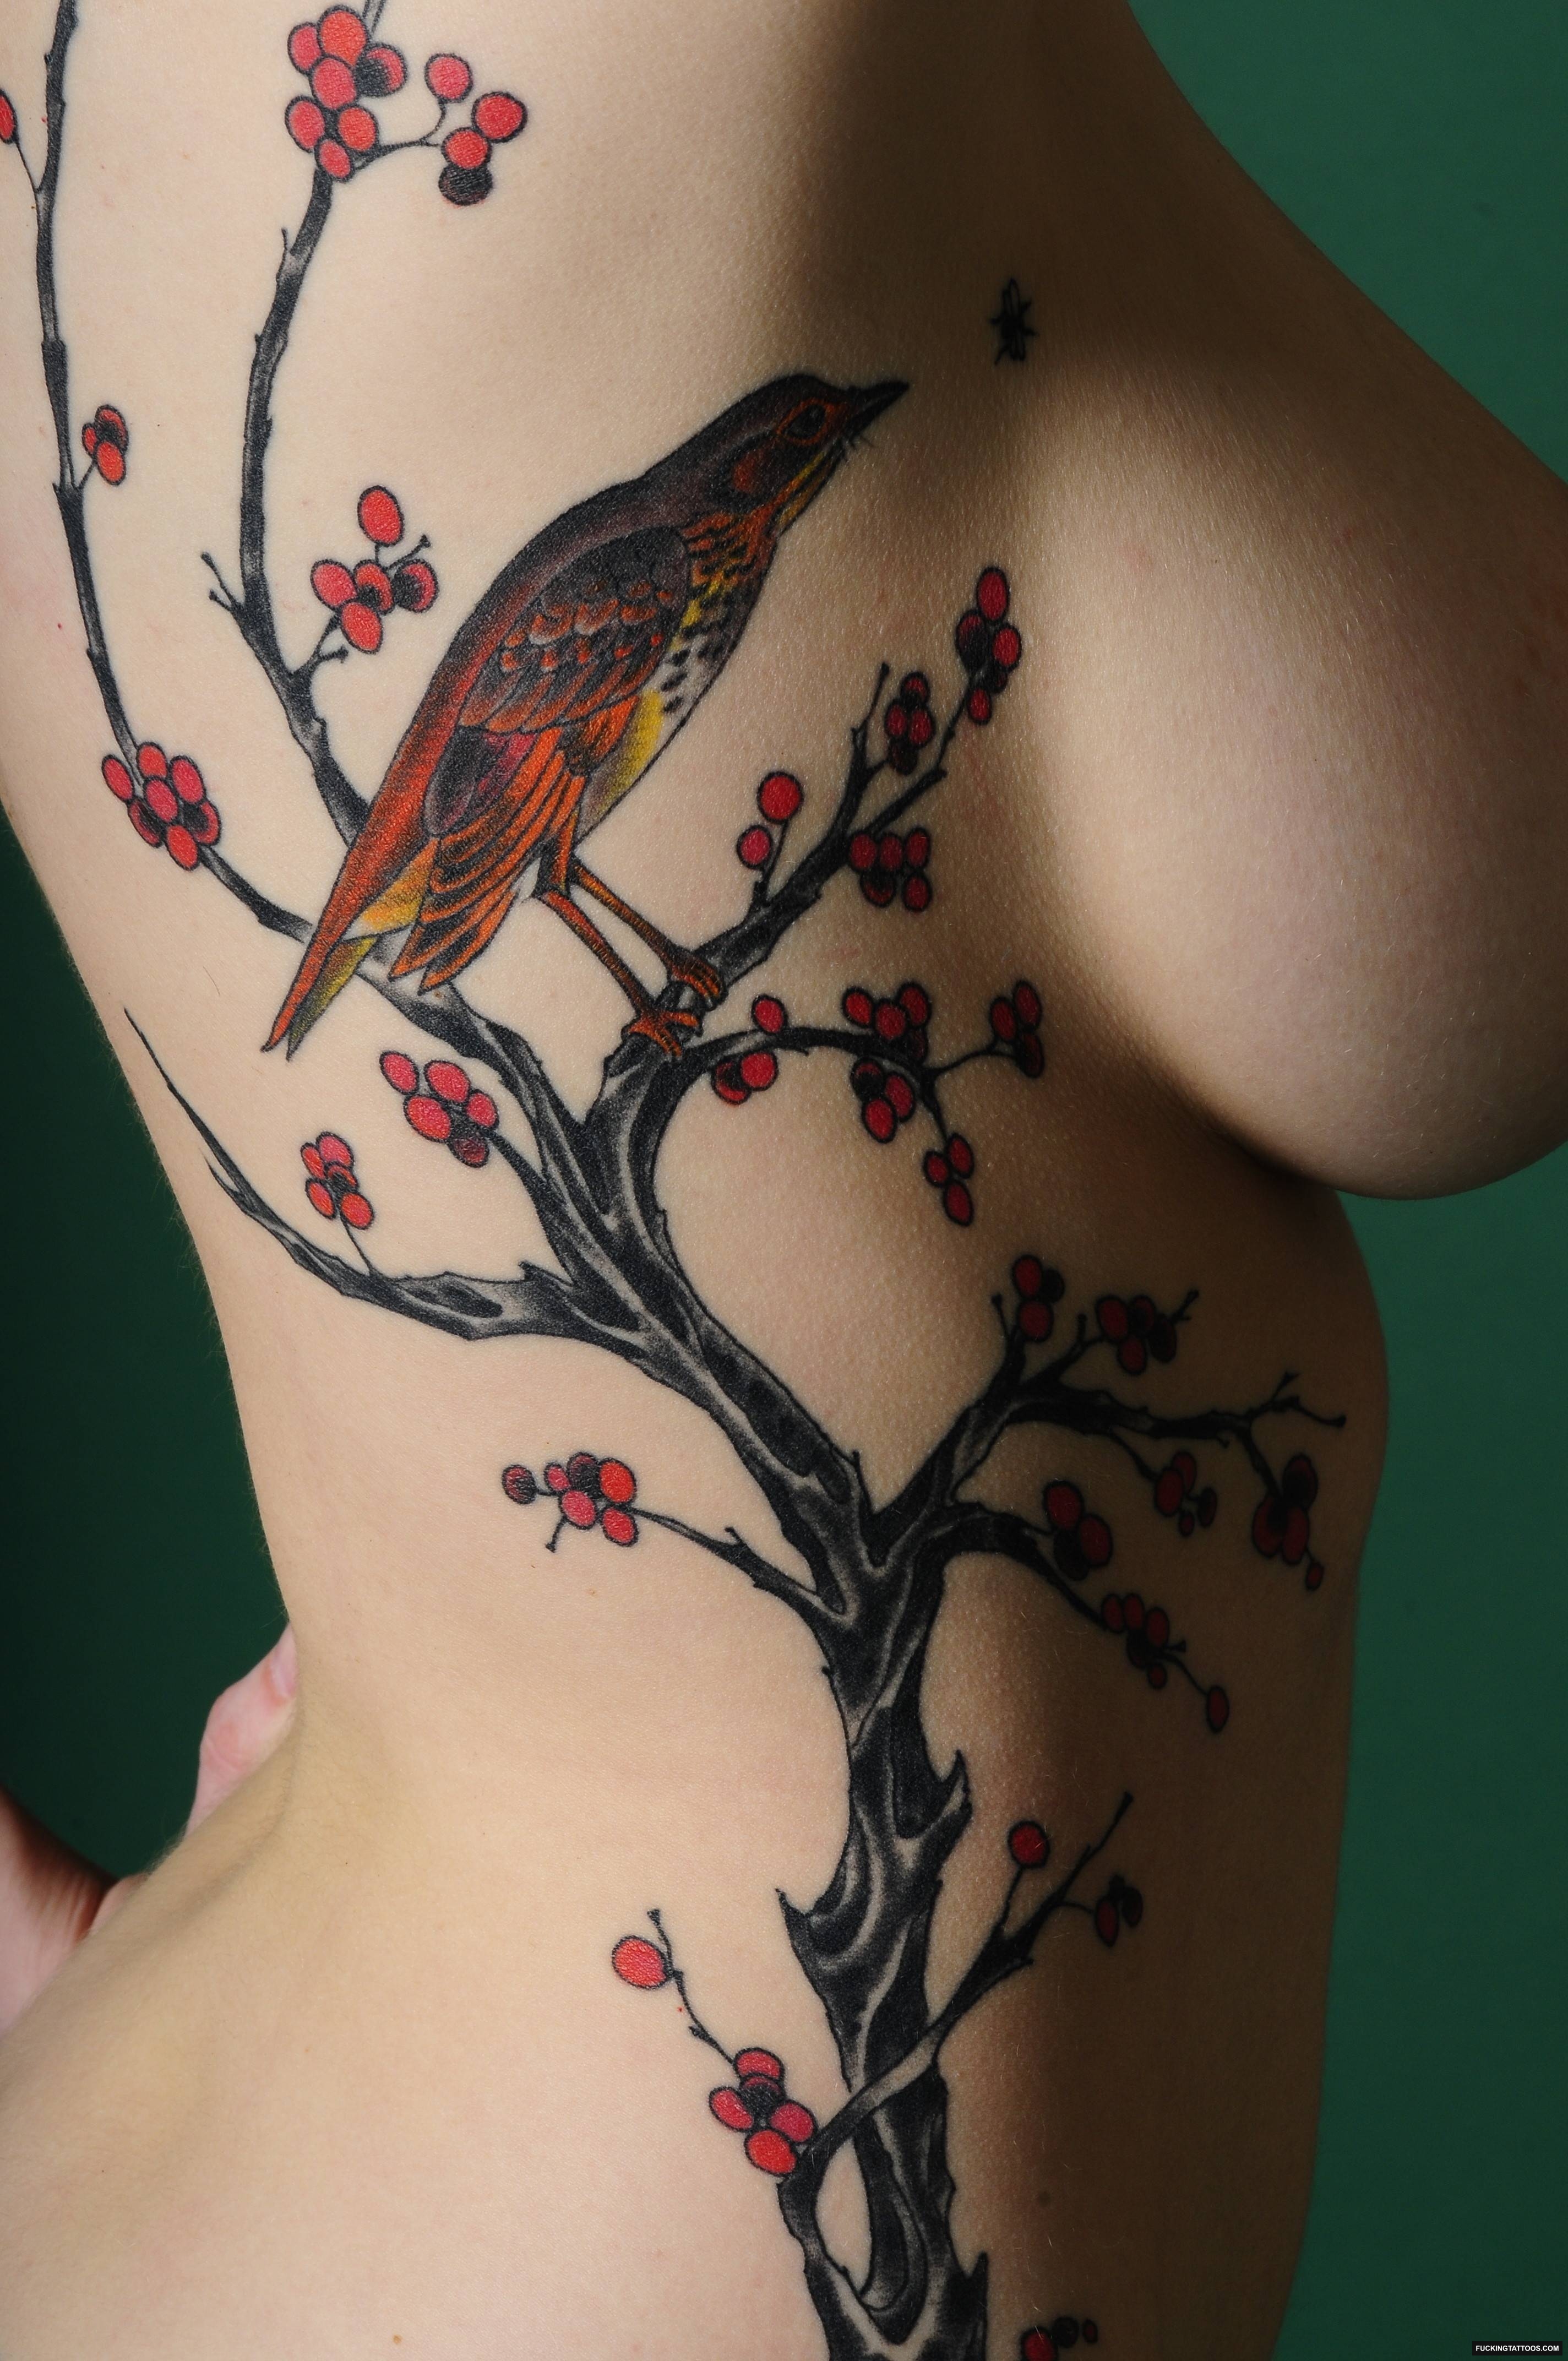 Large Image Of A Lovely Cherry Blossom Tattoo On What I Presume Is The Side Of A Hot Chick!